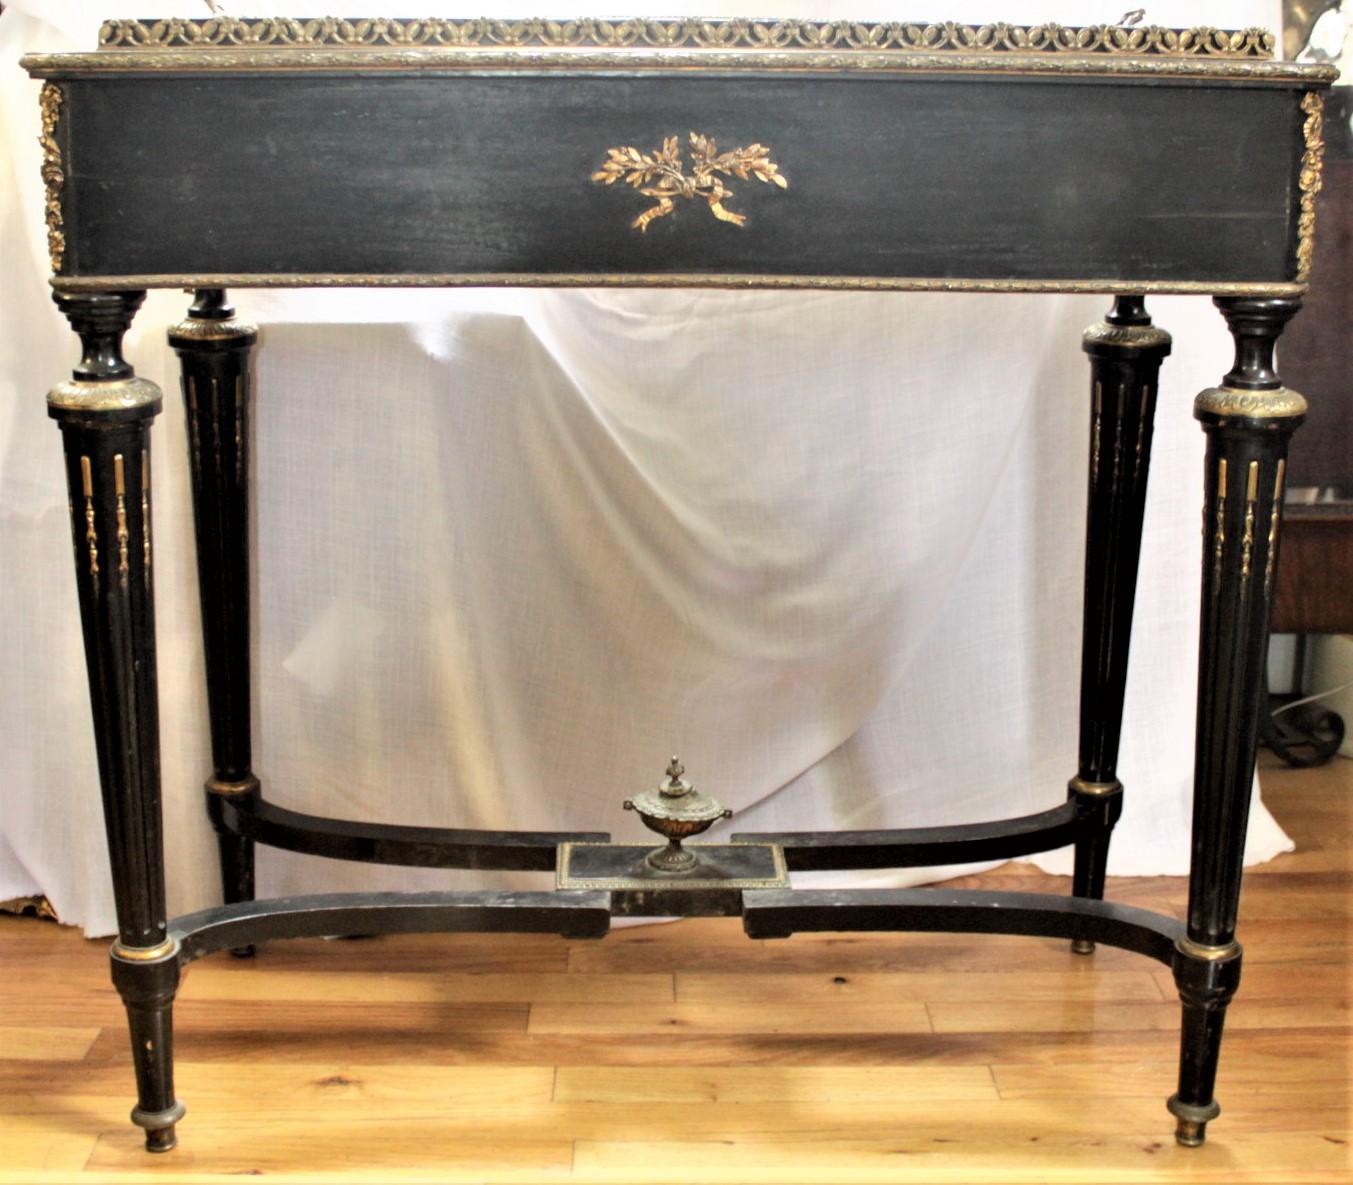 Cast Antique French Louis XVI Styled Ebonized Jardinière Table with Inset Plaque Top For Sale